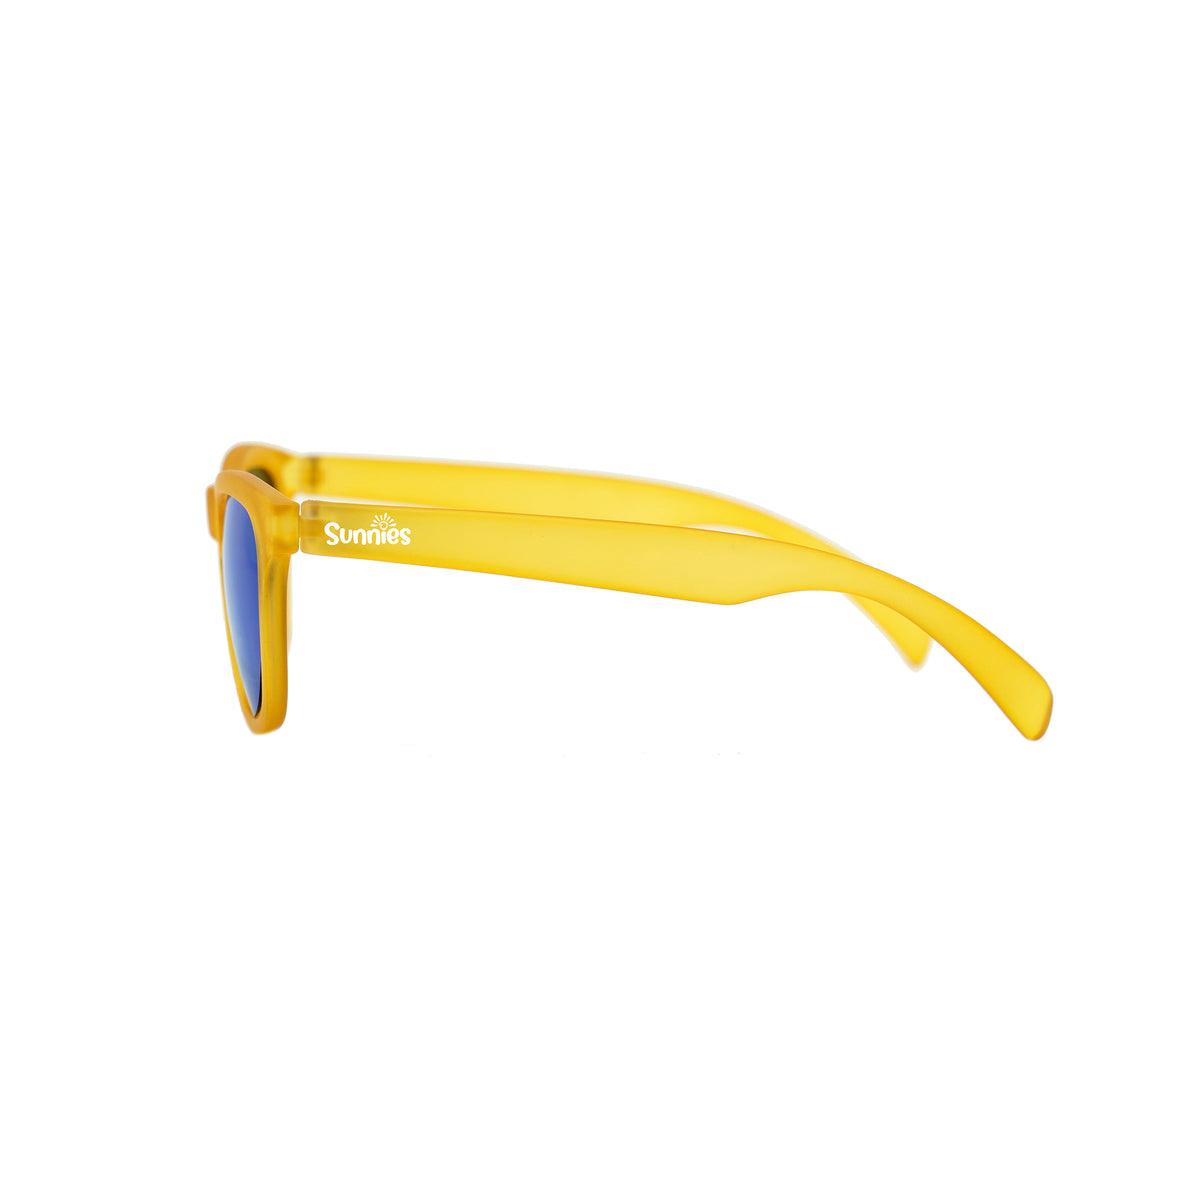 Side view of kids polarized sunglasses by Sunnies in a yellow, transparent frame and reflective blue lenses